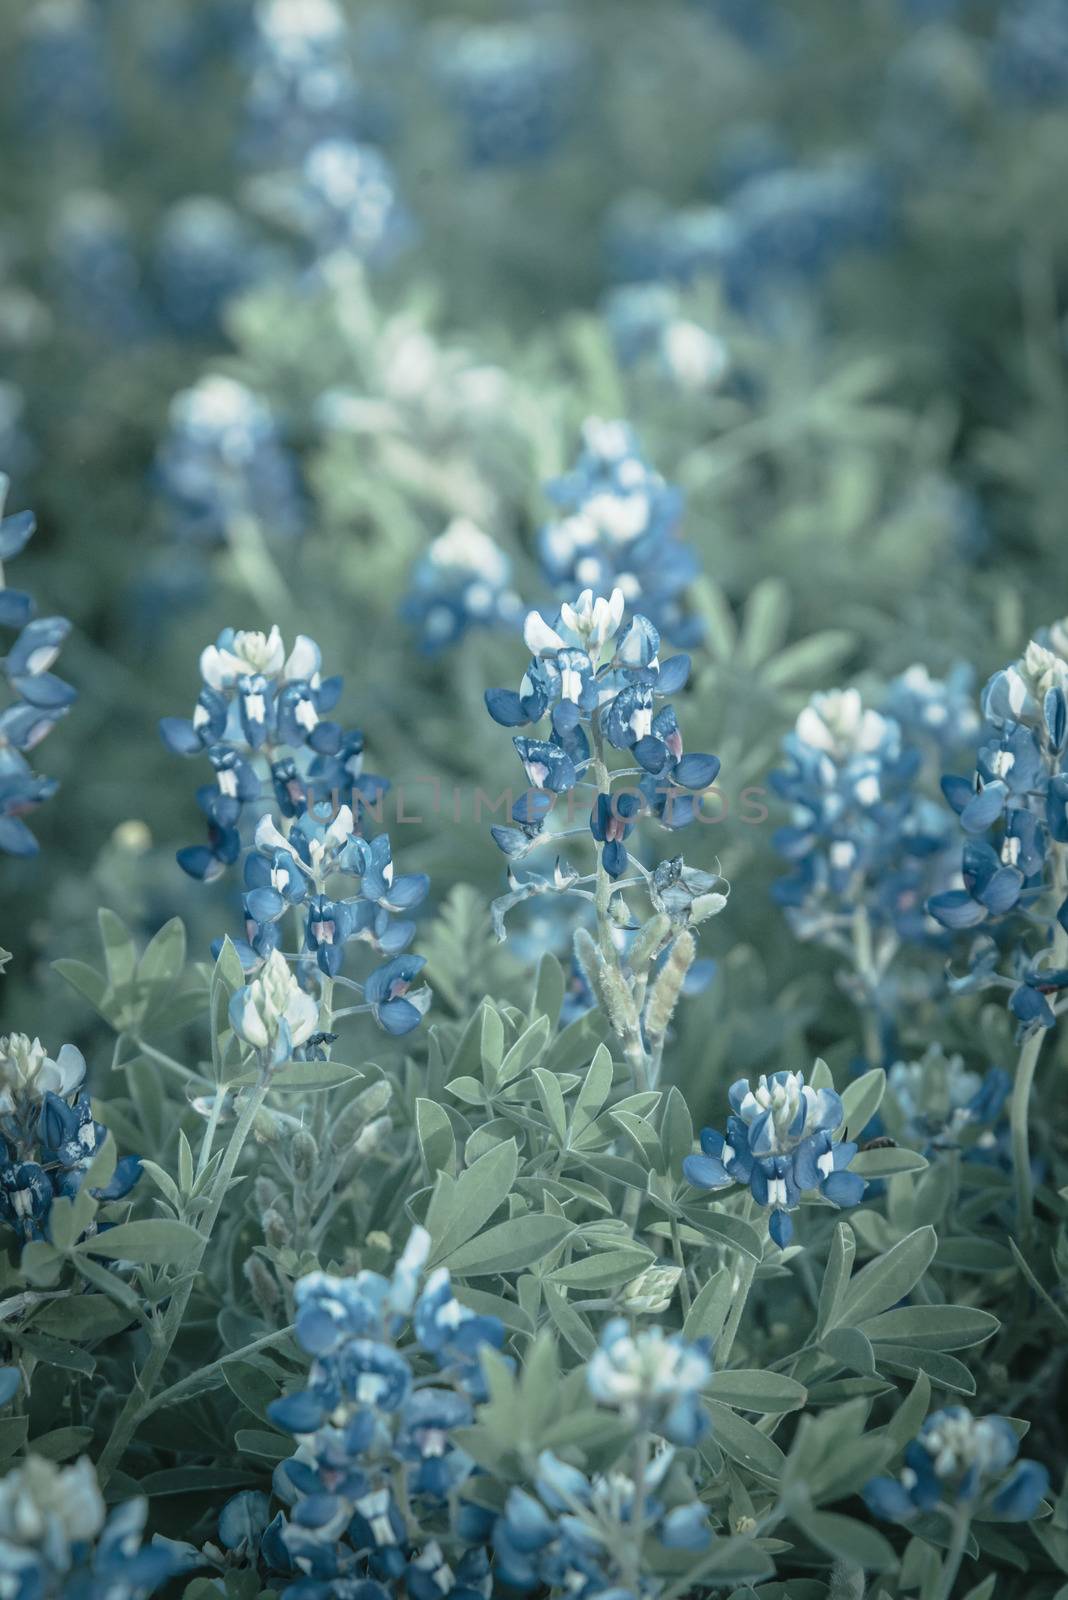 Filtered image blooming Bluebonnet wildflower at springtime near Dallas, Texas by trongnguyen